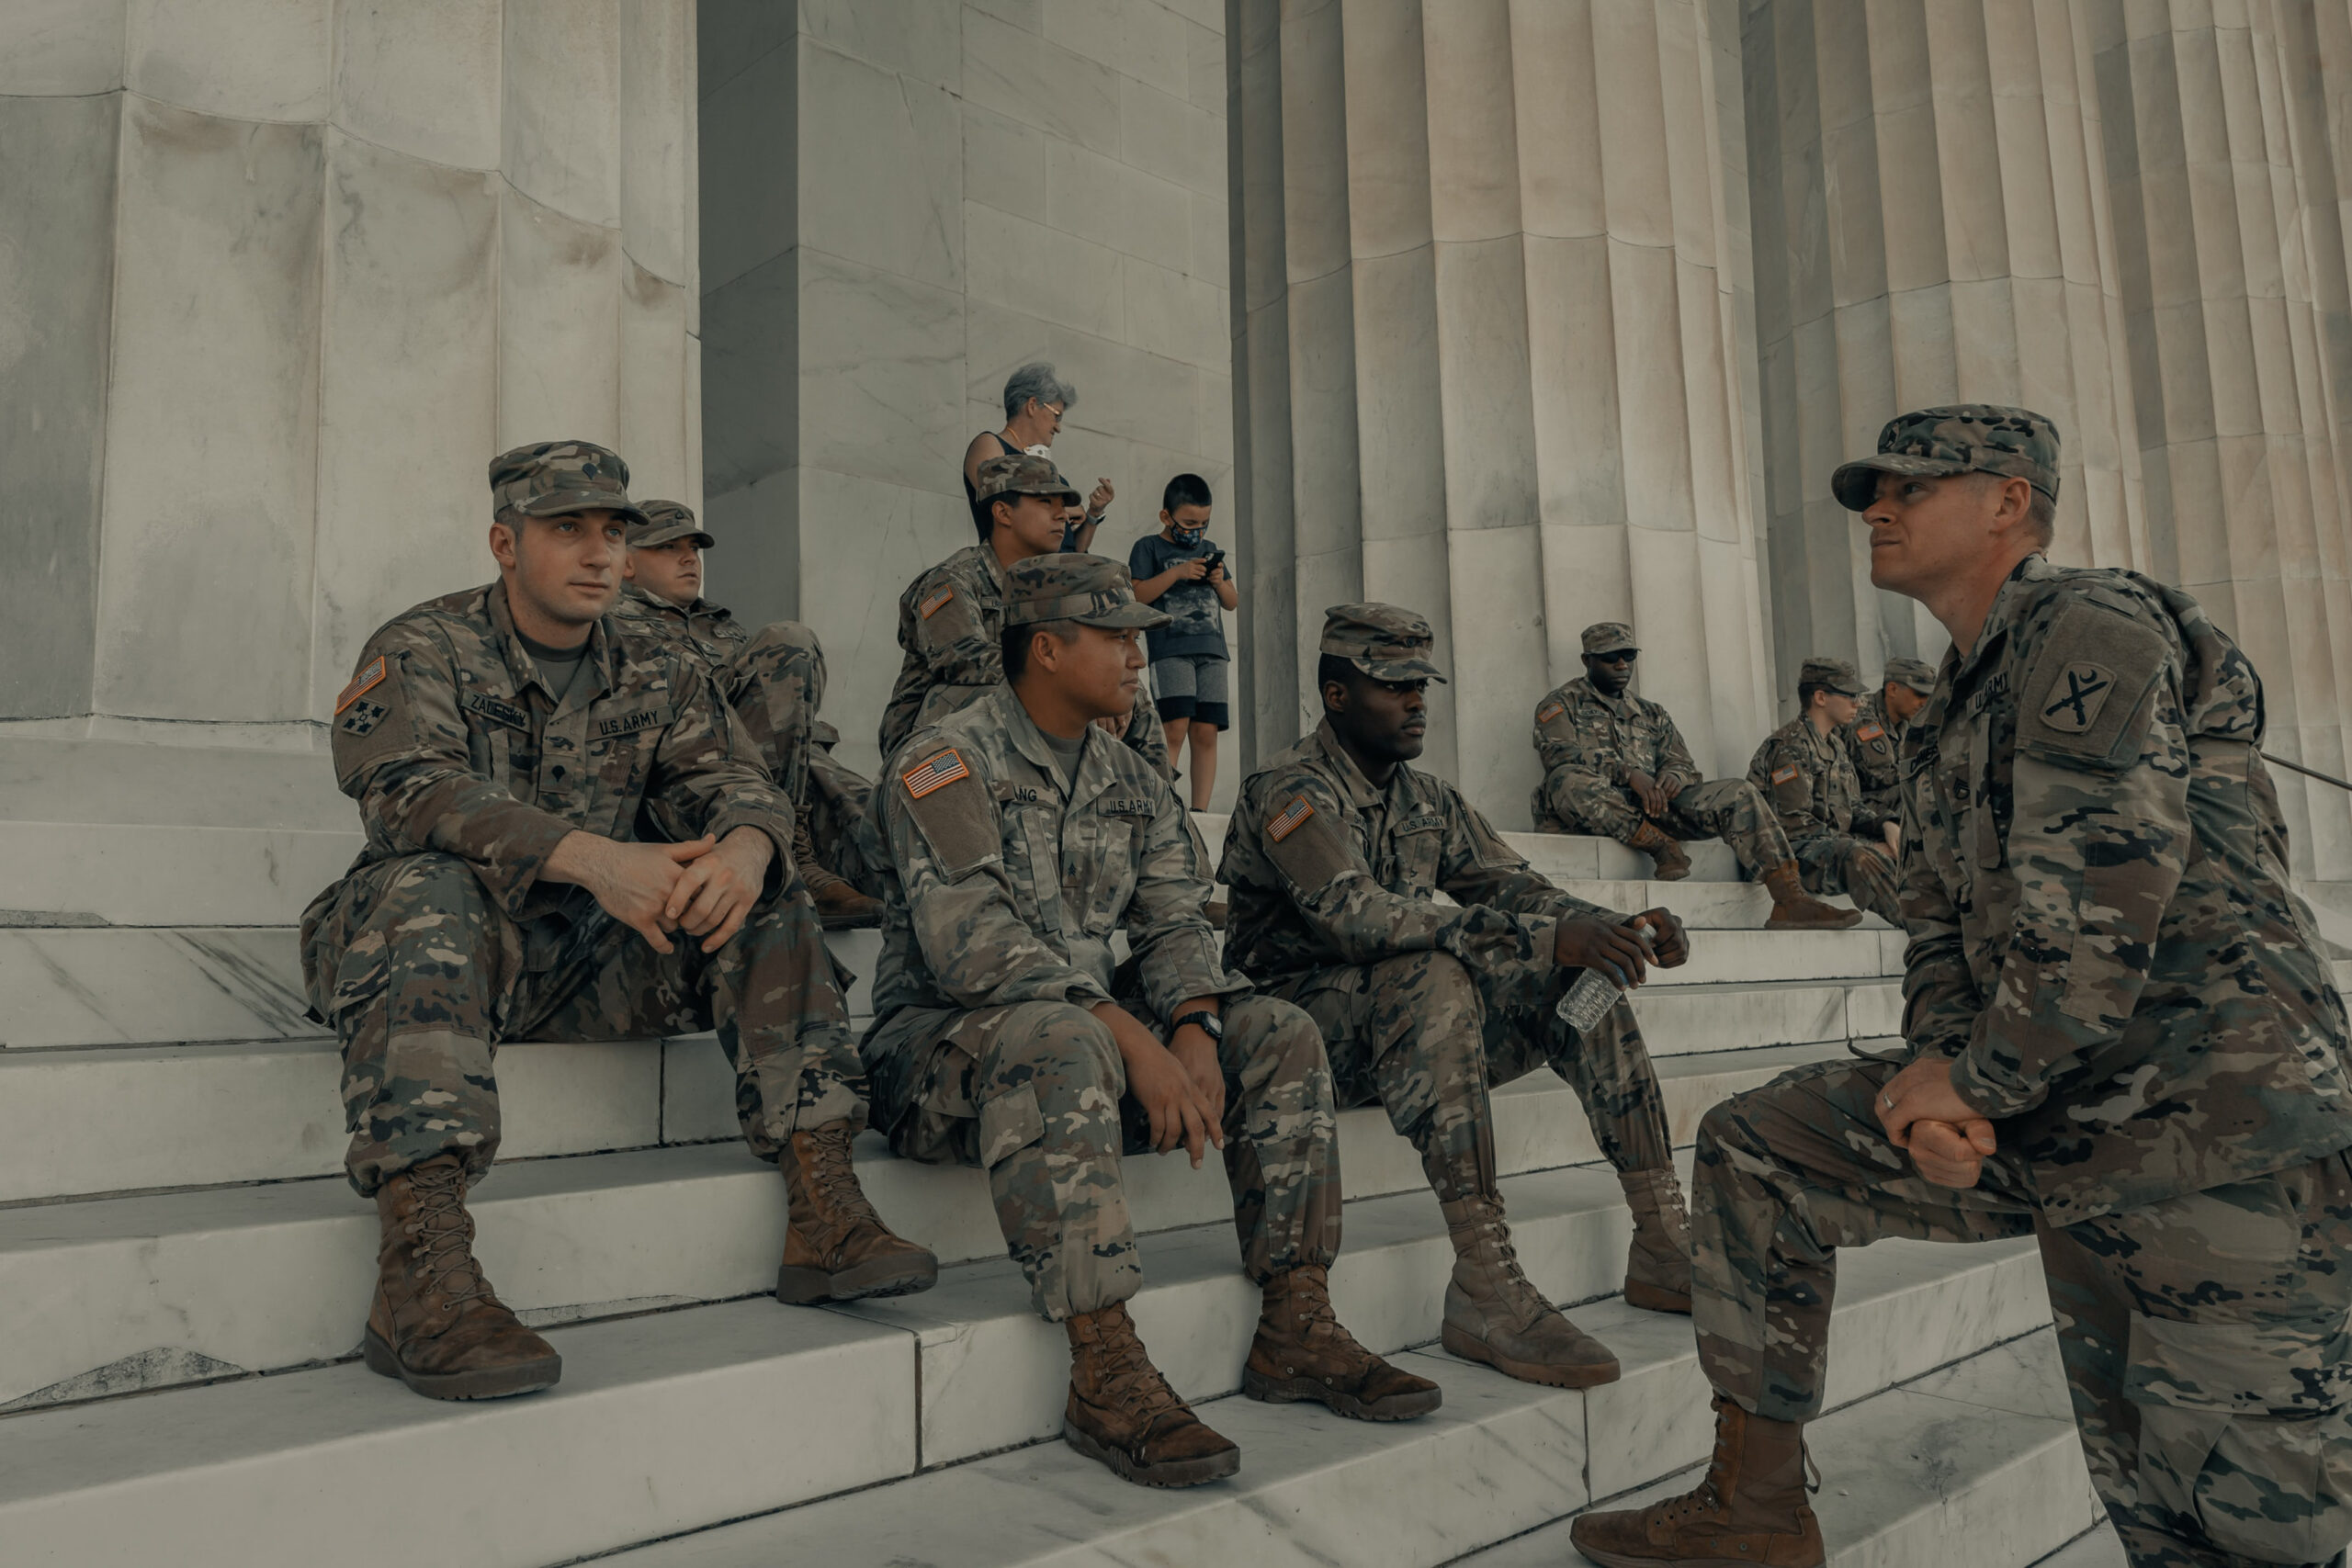 Soliders Talking on the Steps of Capitol